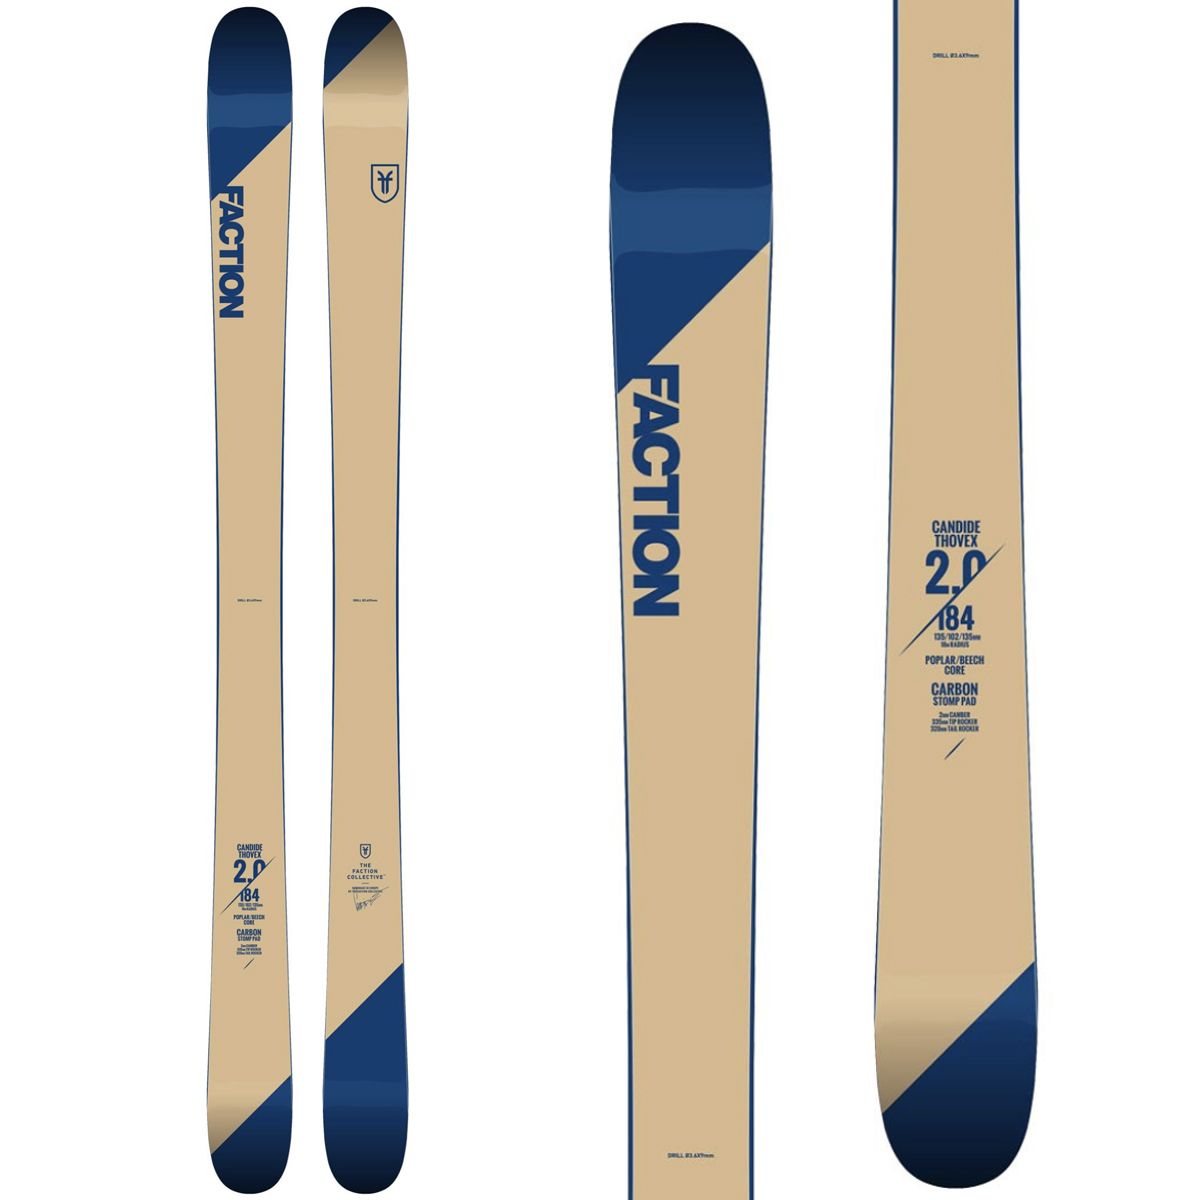 Skis Candide 2.0 2019